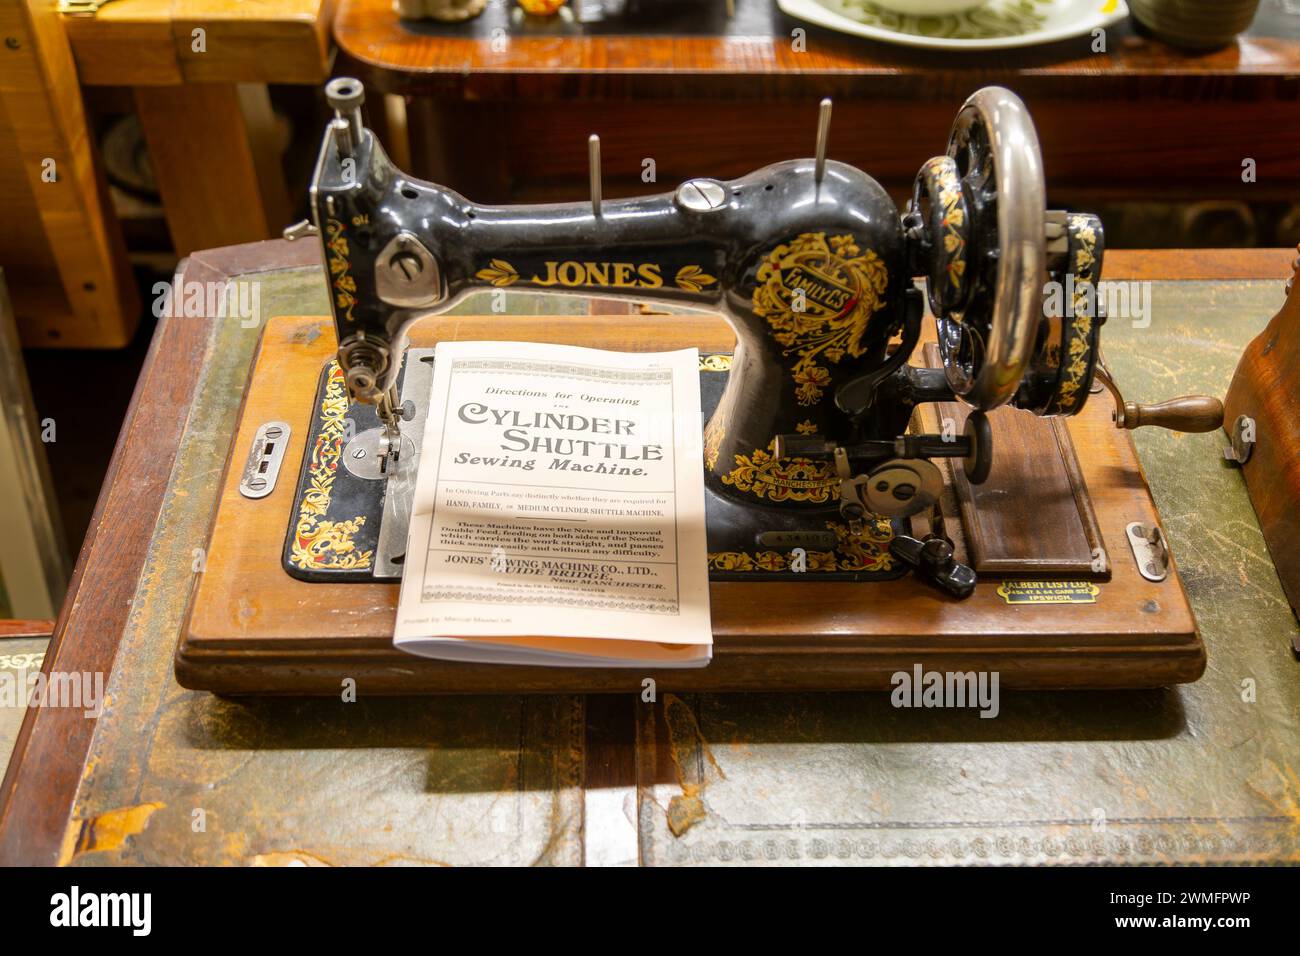 Jones Sewing Machine Company Family Cylinder Shuttle model with instruction manual on display in auction room, UK Stock Photo